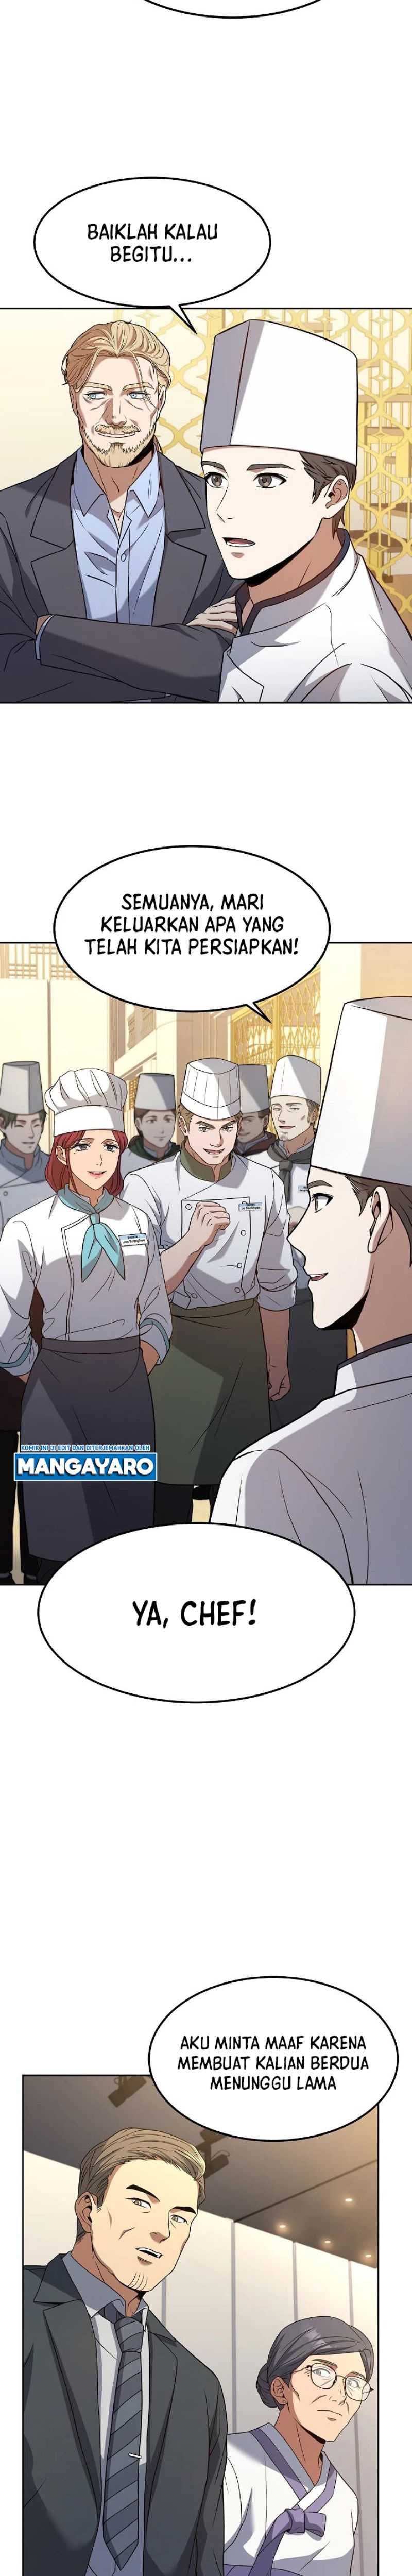 Youngest Chef From the 3rd Rate Hotel Chapter 48